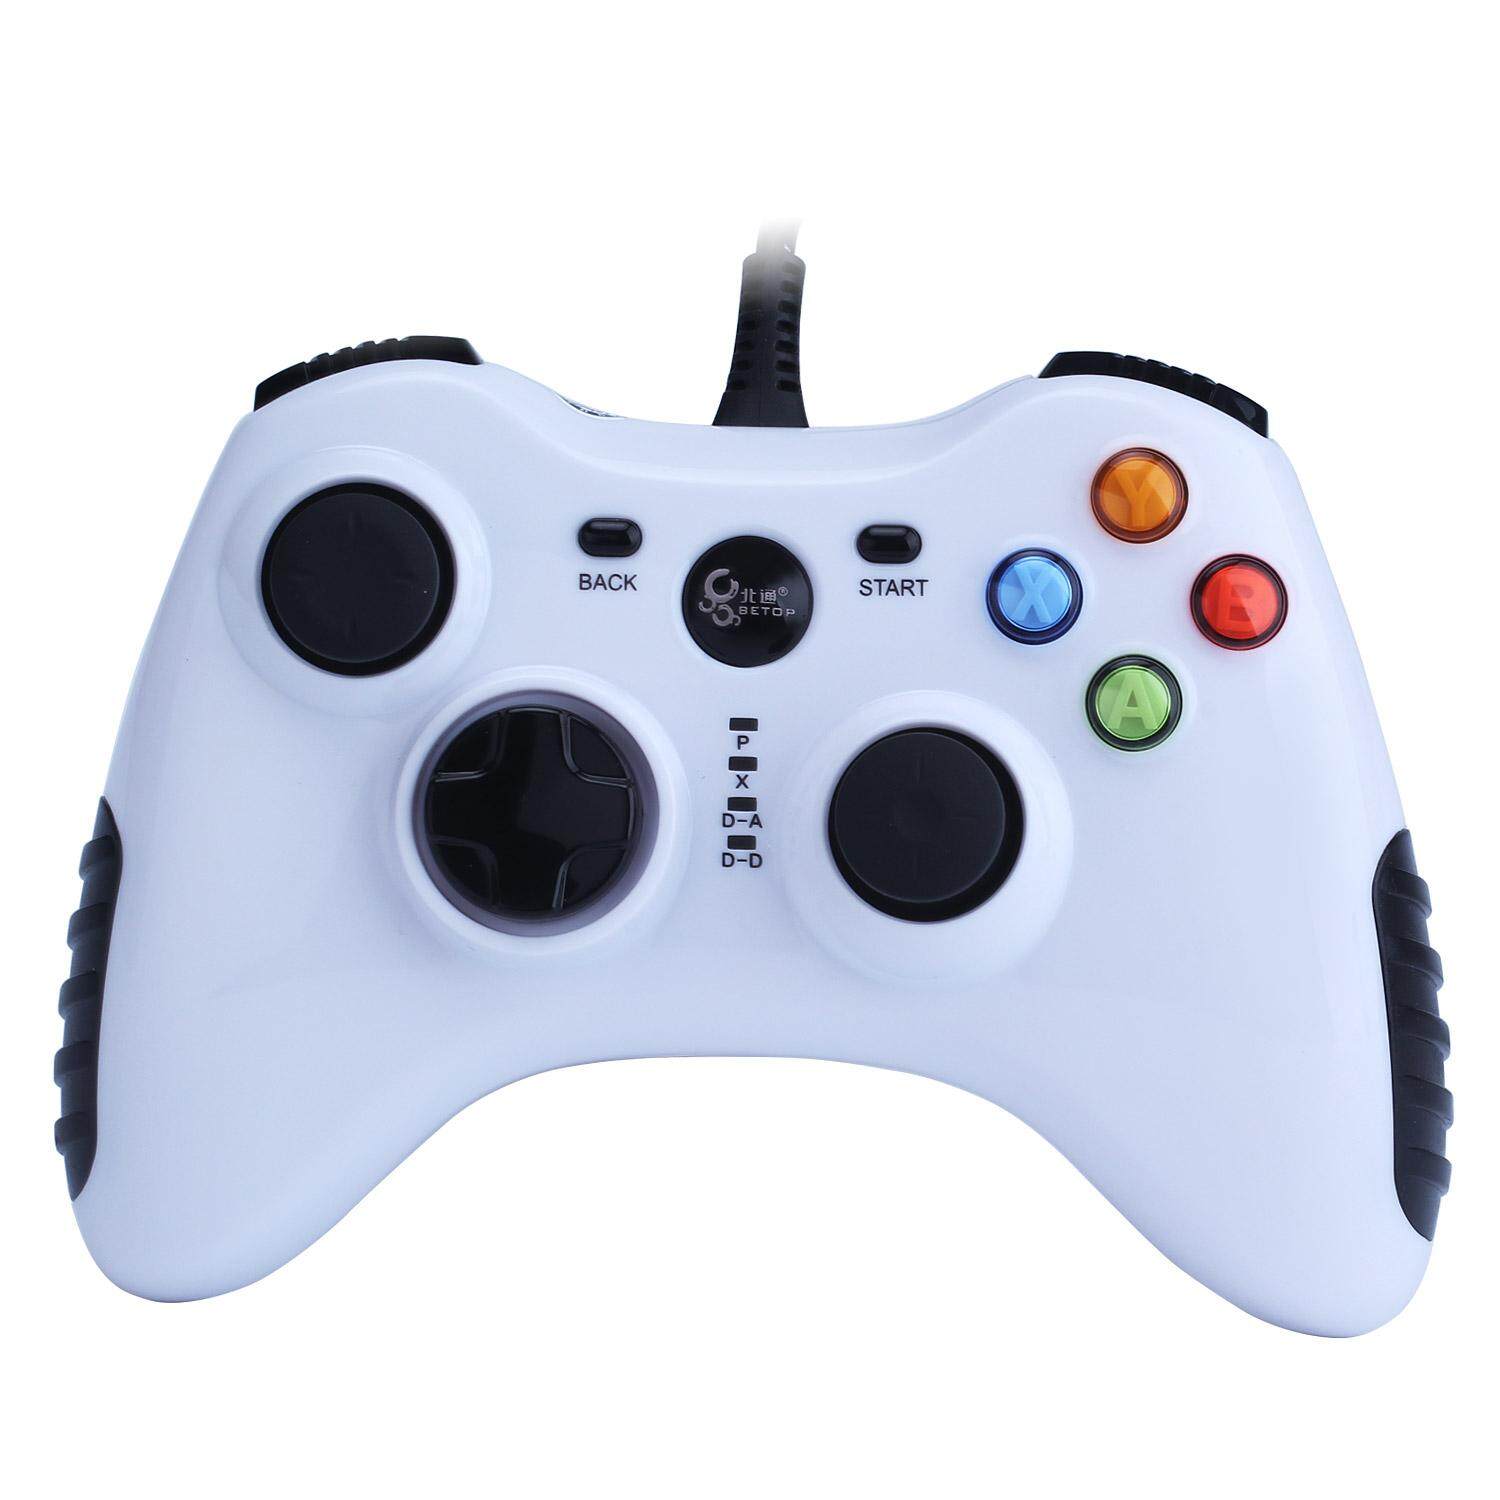 robxug Wired Game Controller for PC(Windows XP/7/8/10) Android Devices (White)